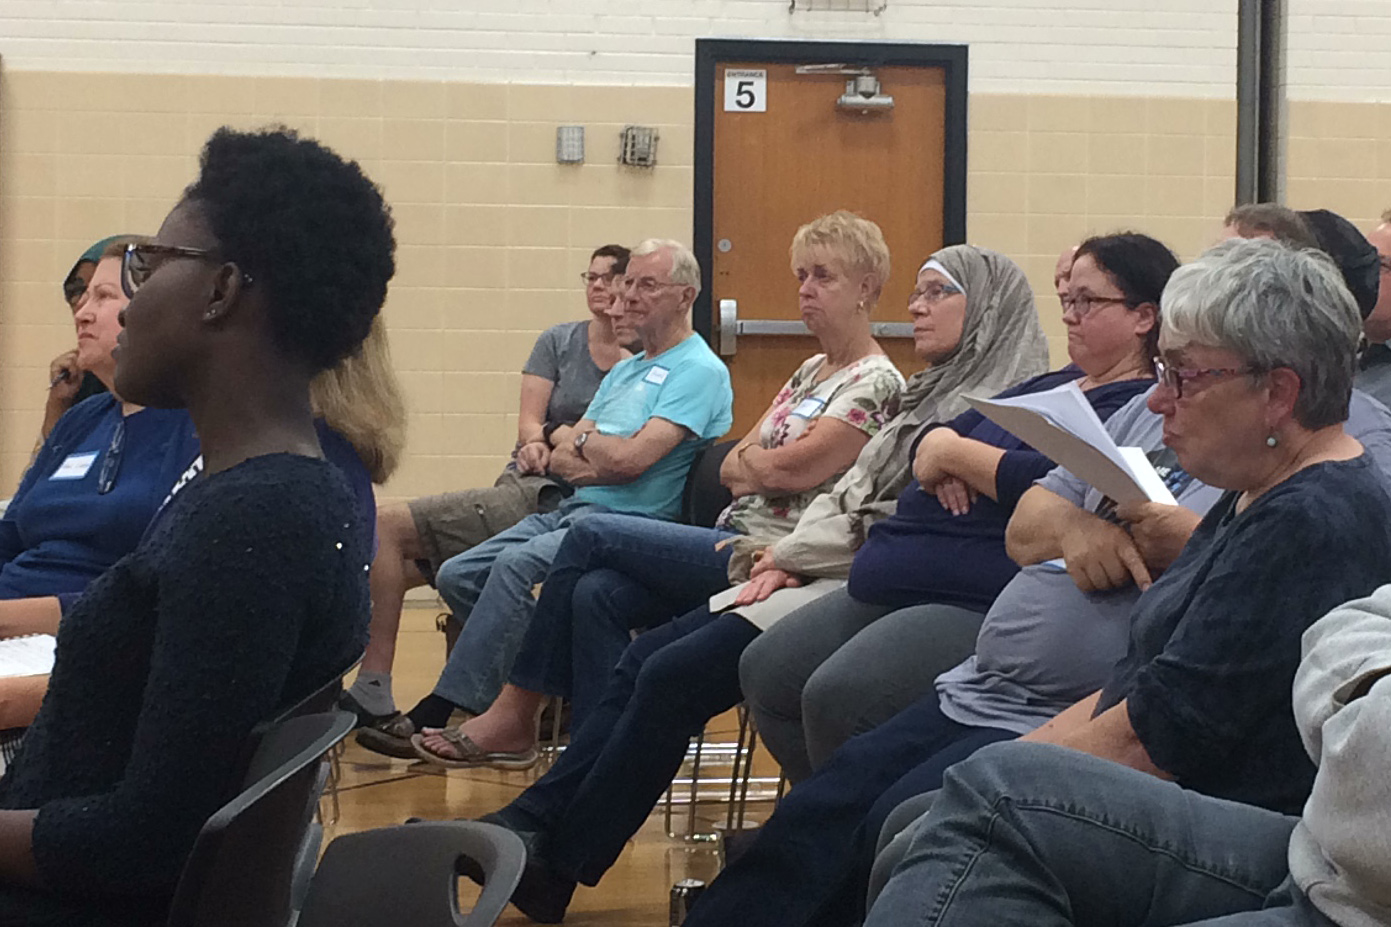 Park community members attentively listen to a speaker at a community meeting led by Muslim leaders, Sept. 19.